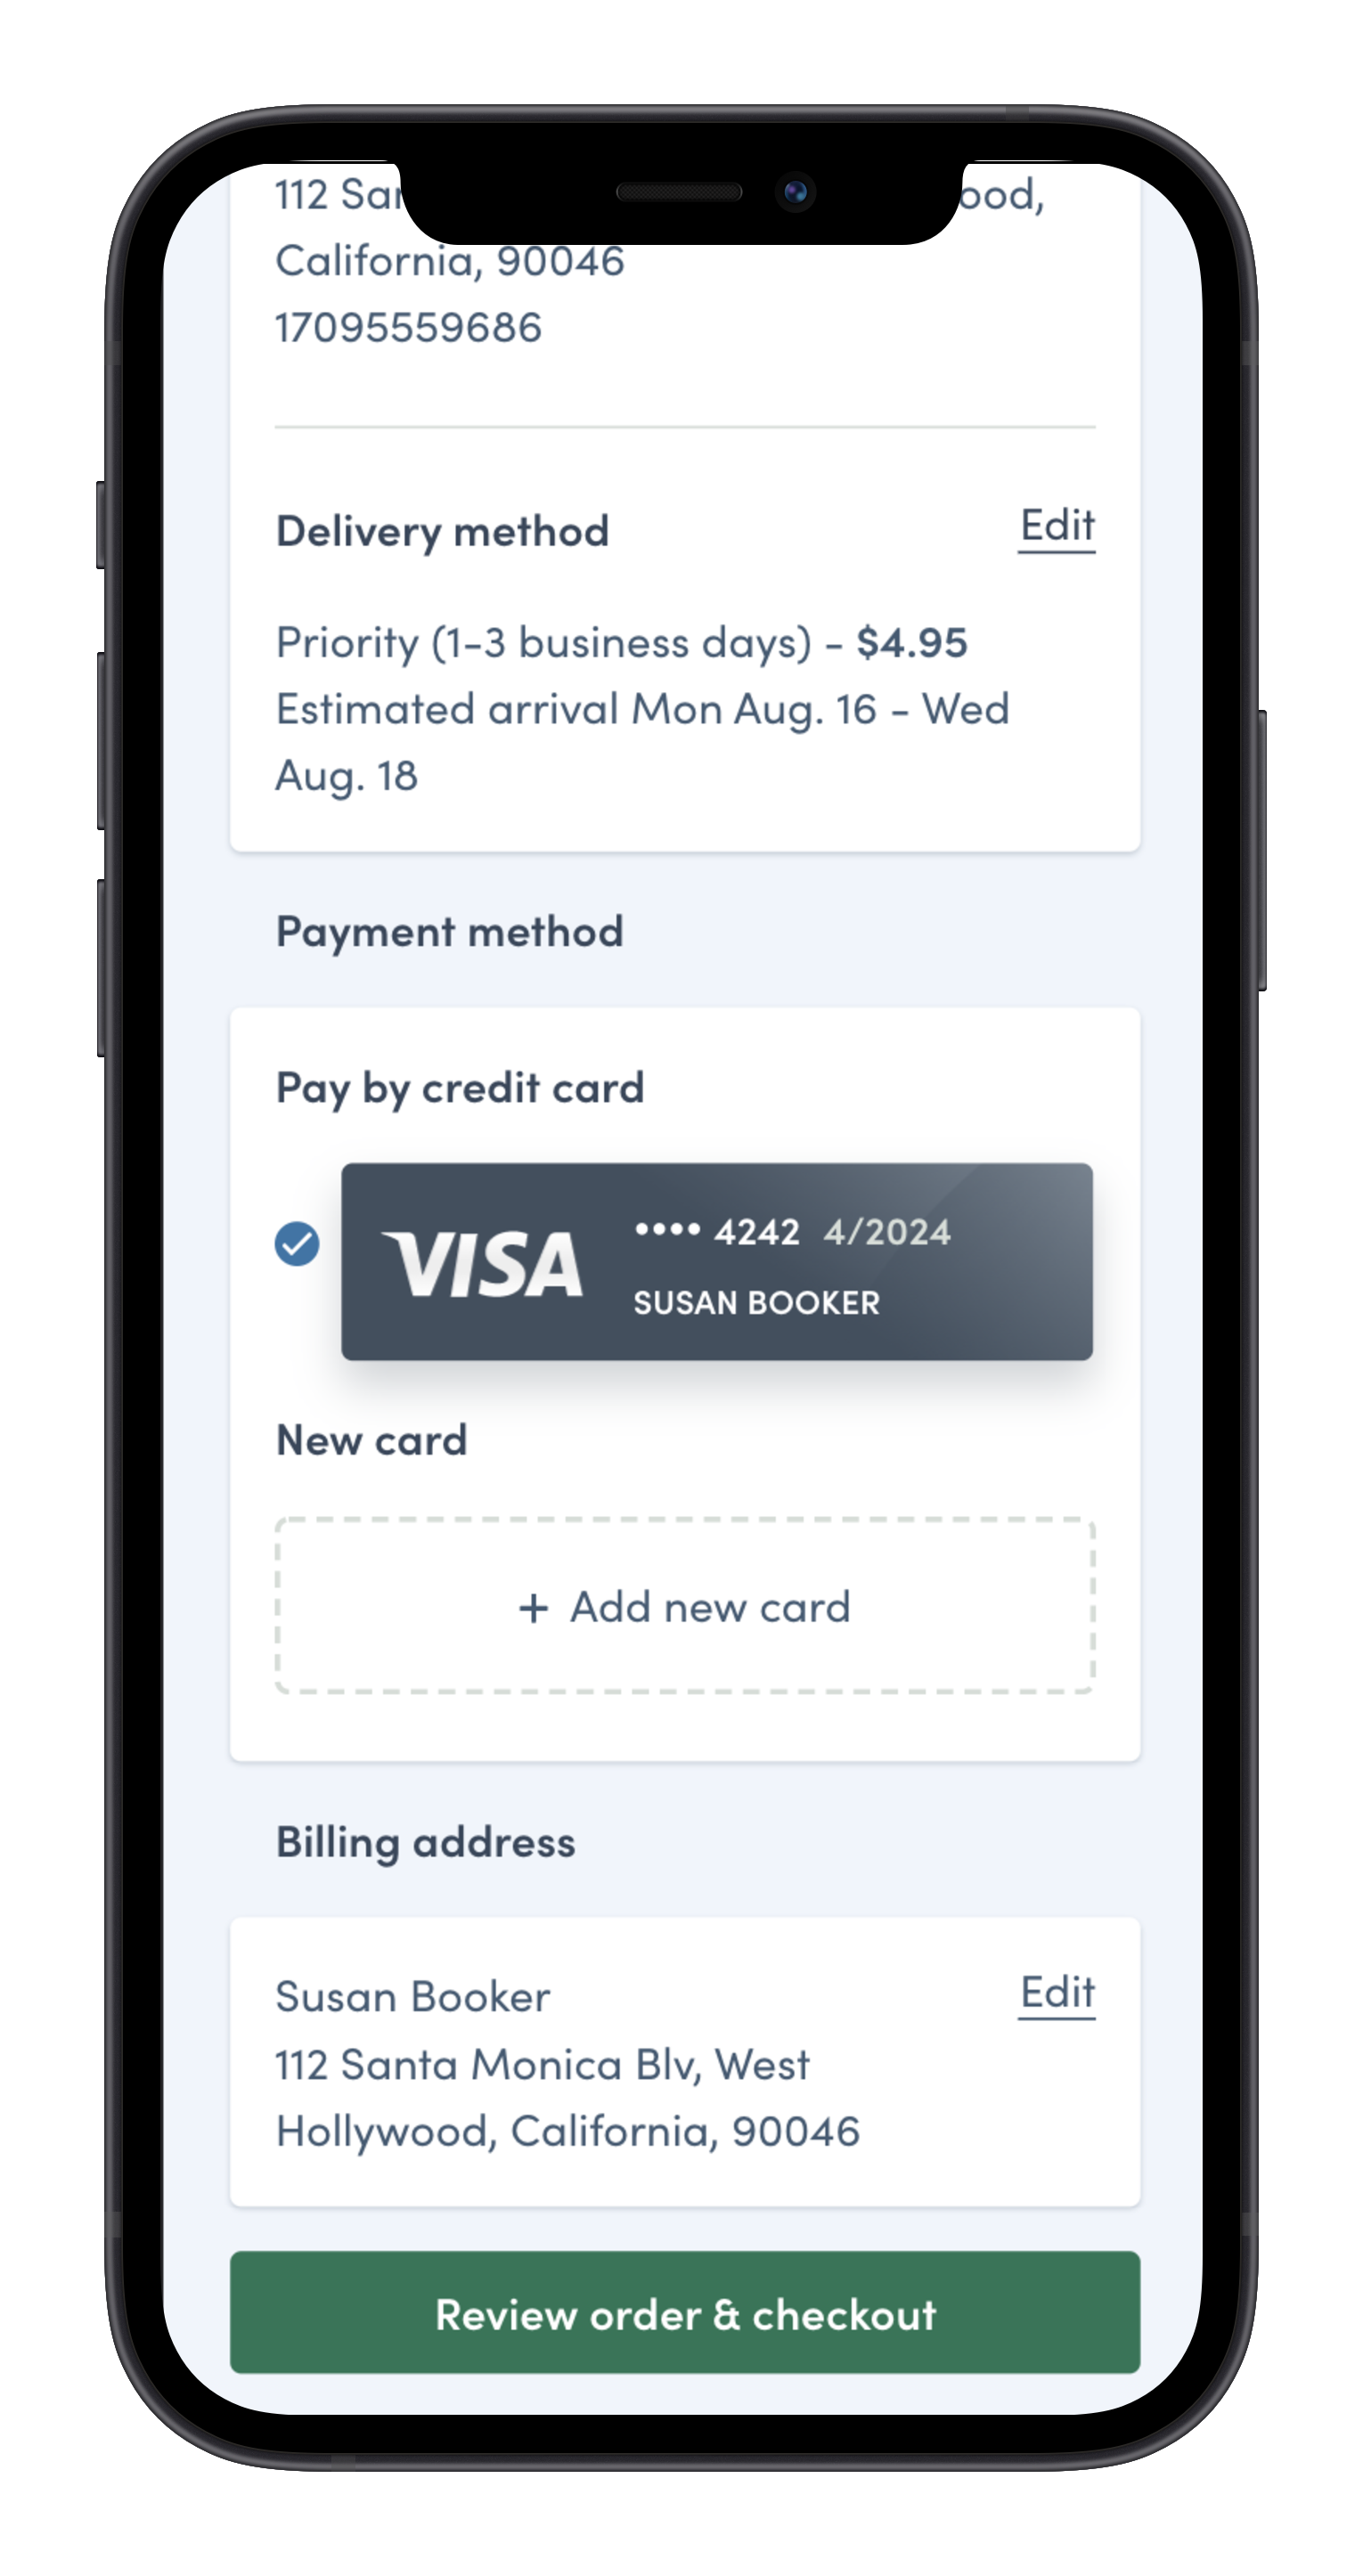 Select a saved payment method or enter a new card for the order.